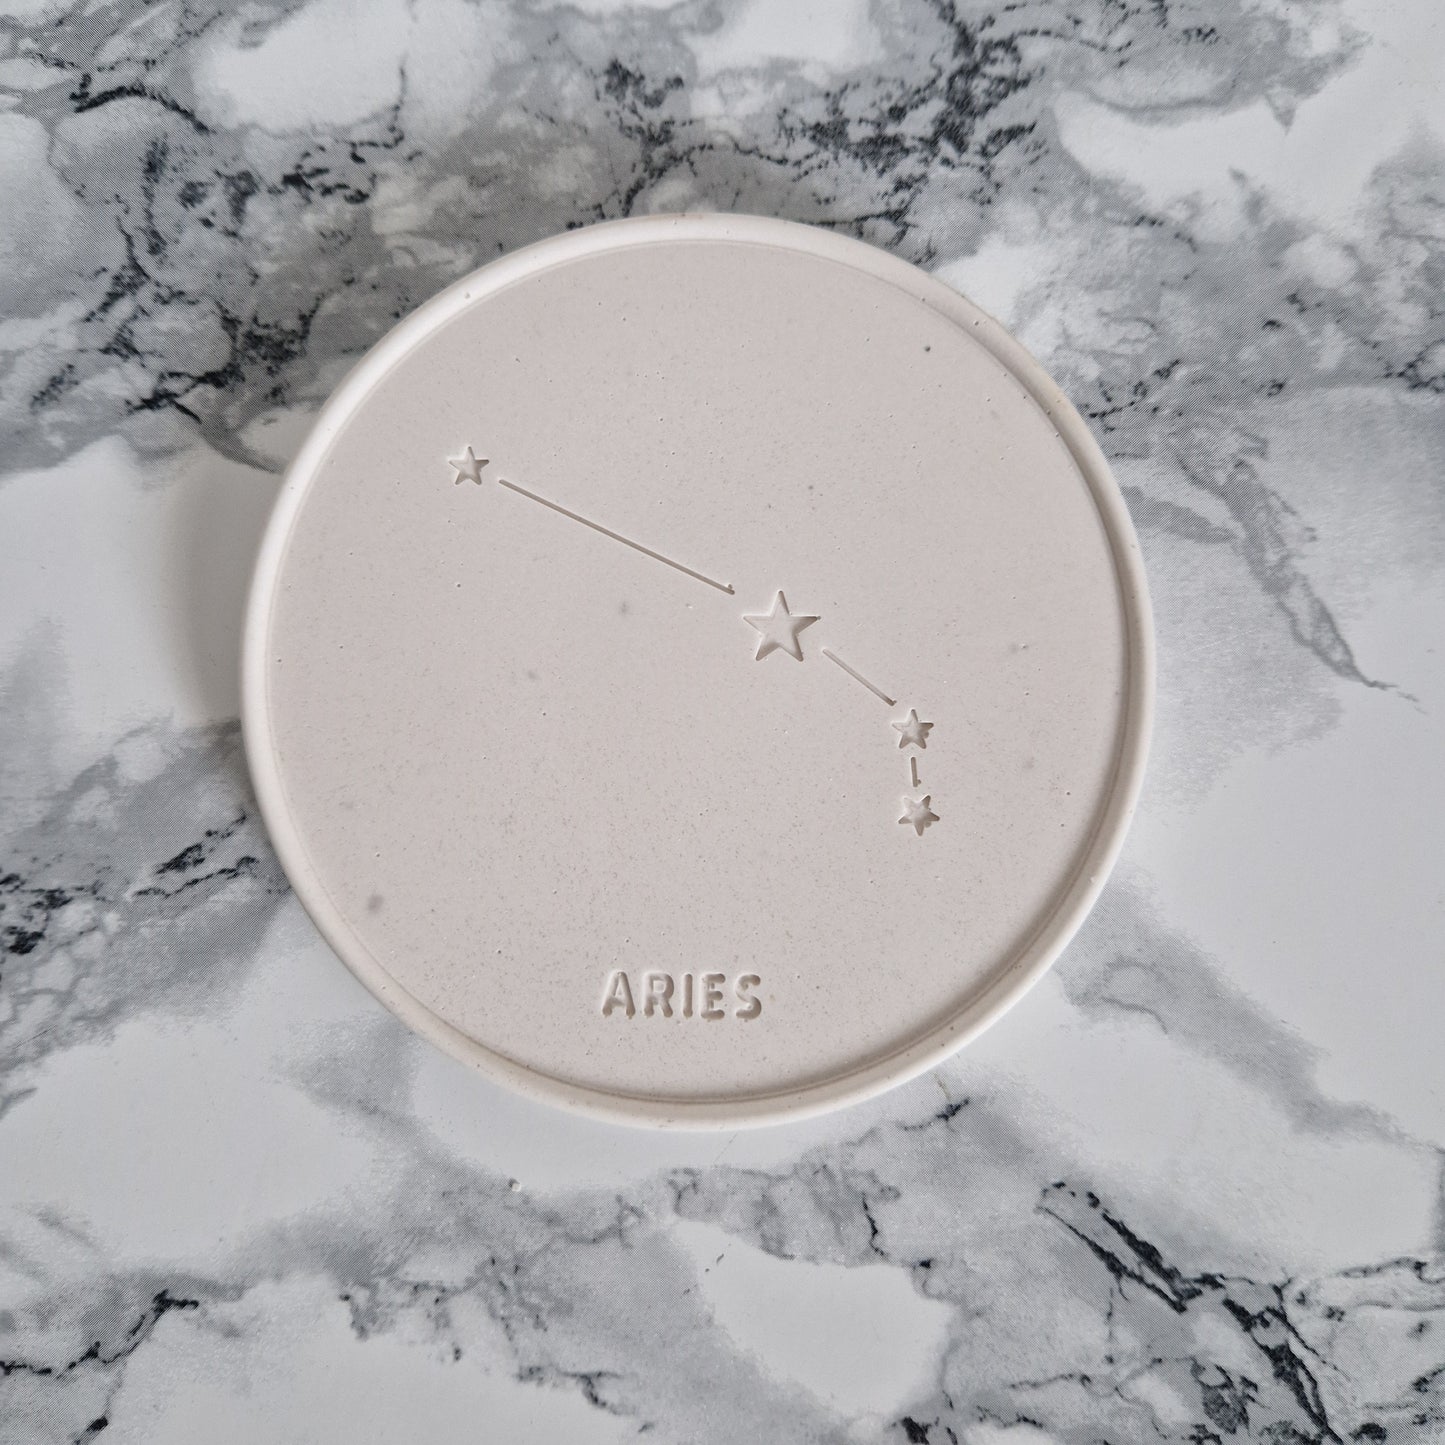 Constellation Star Sign Coasters